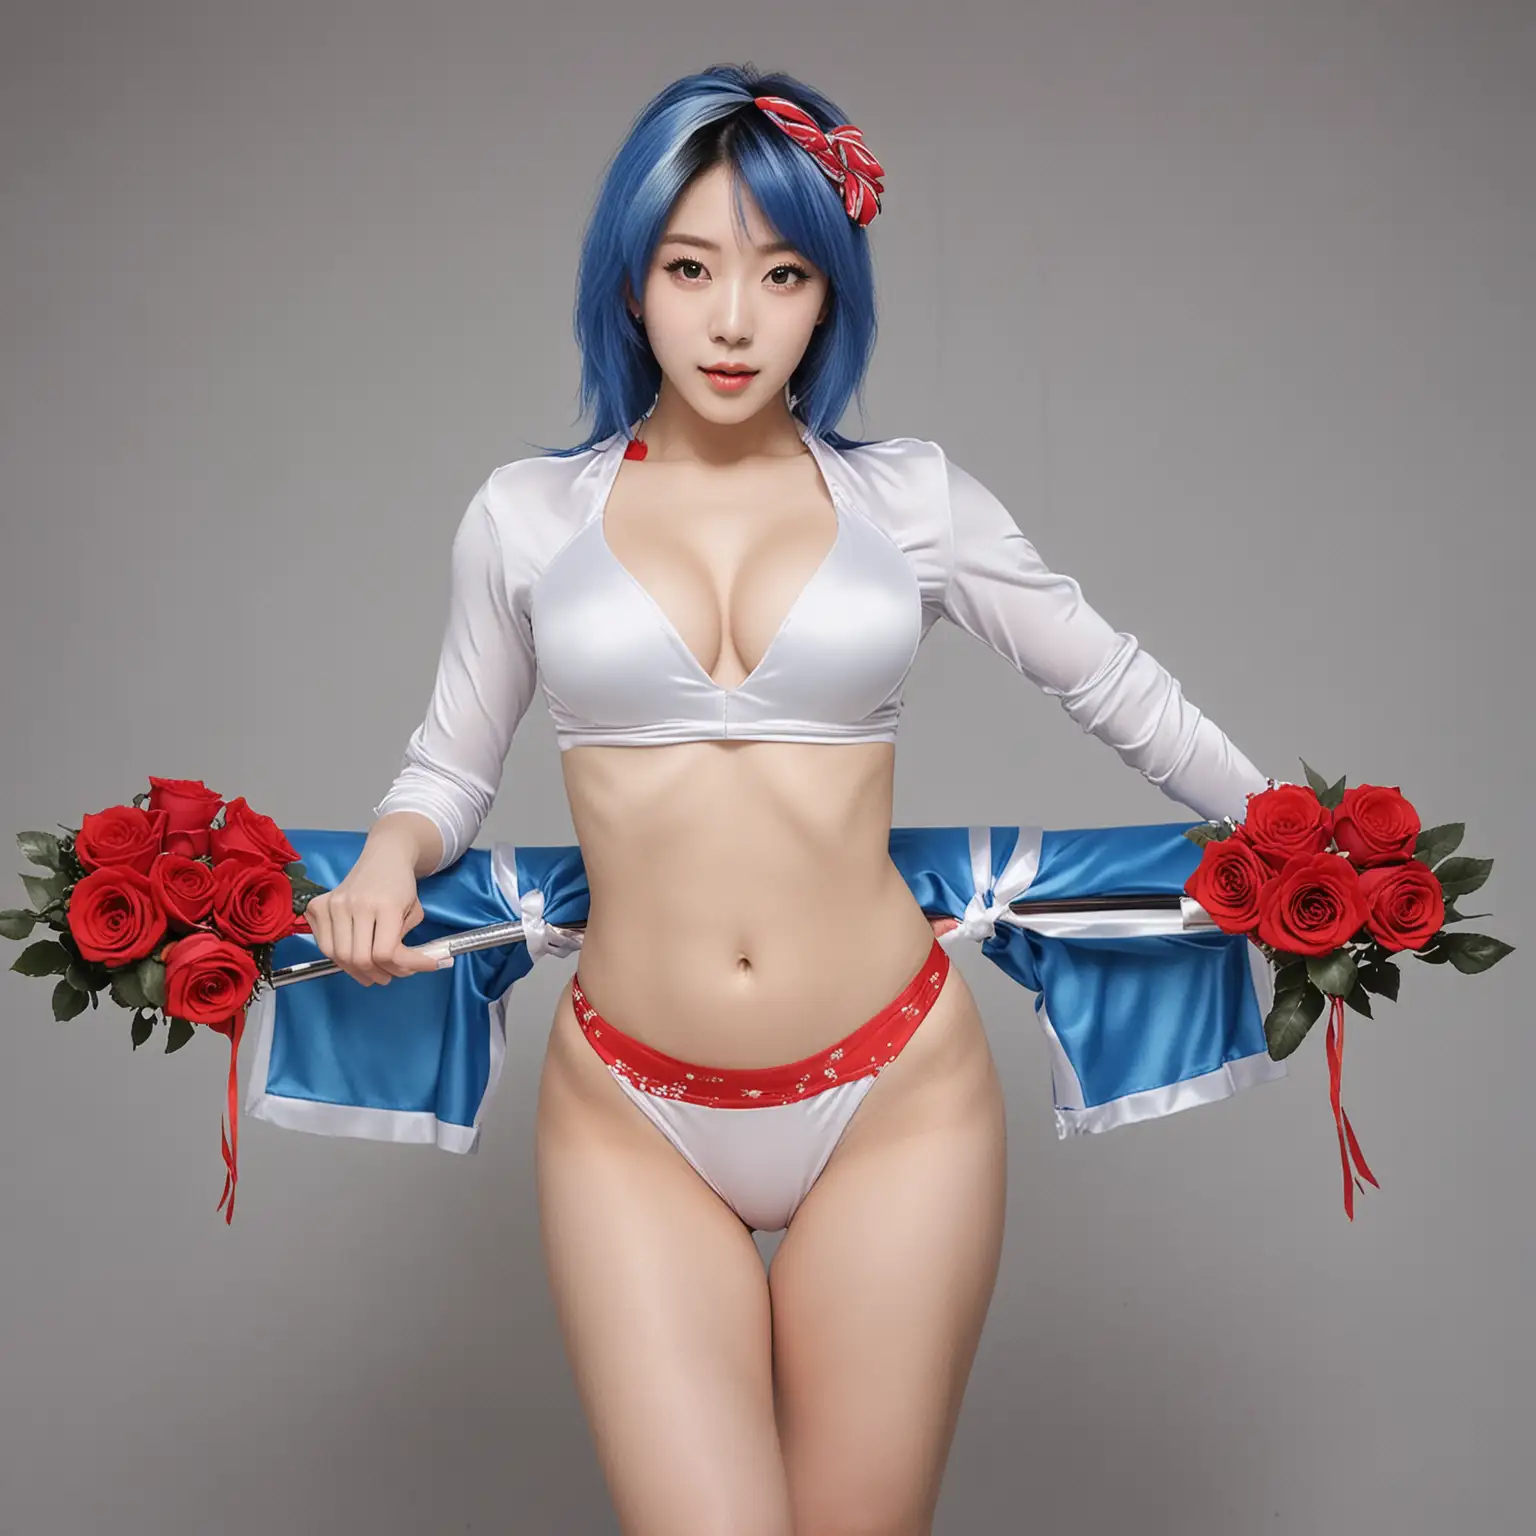 Elegant Korean Gymnast with Red and White Hair Performing on Pommel Horse Amidst Blue Roses